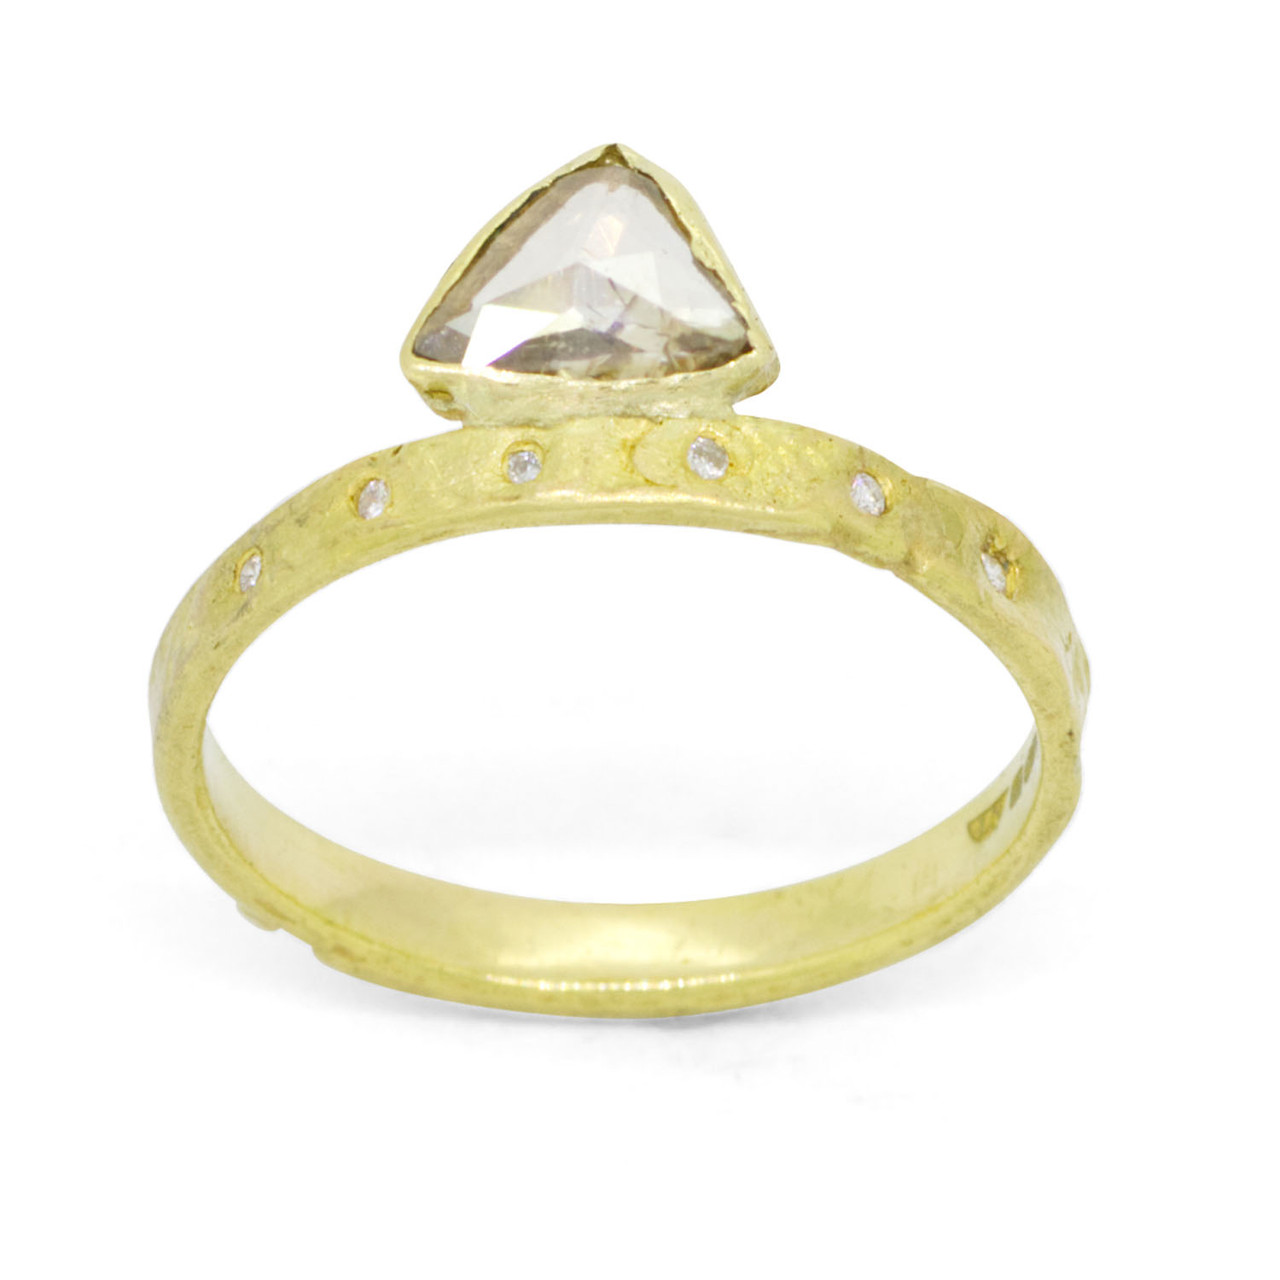 One-Of-A-Kind Molten Triangular Diamond Ring, Laura Ngyou, tomfoolery